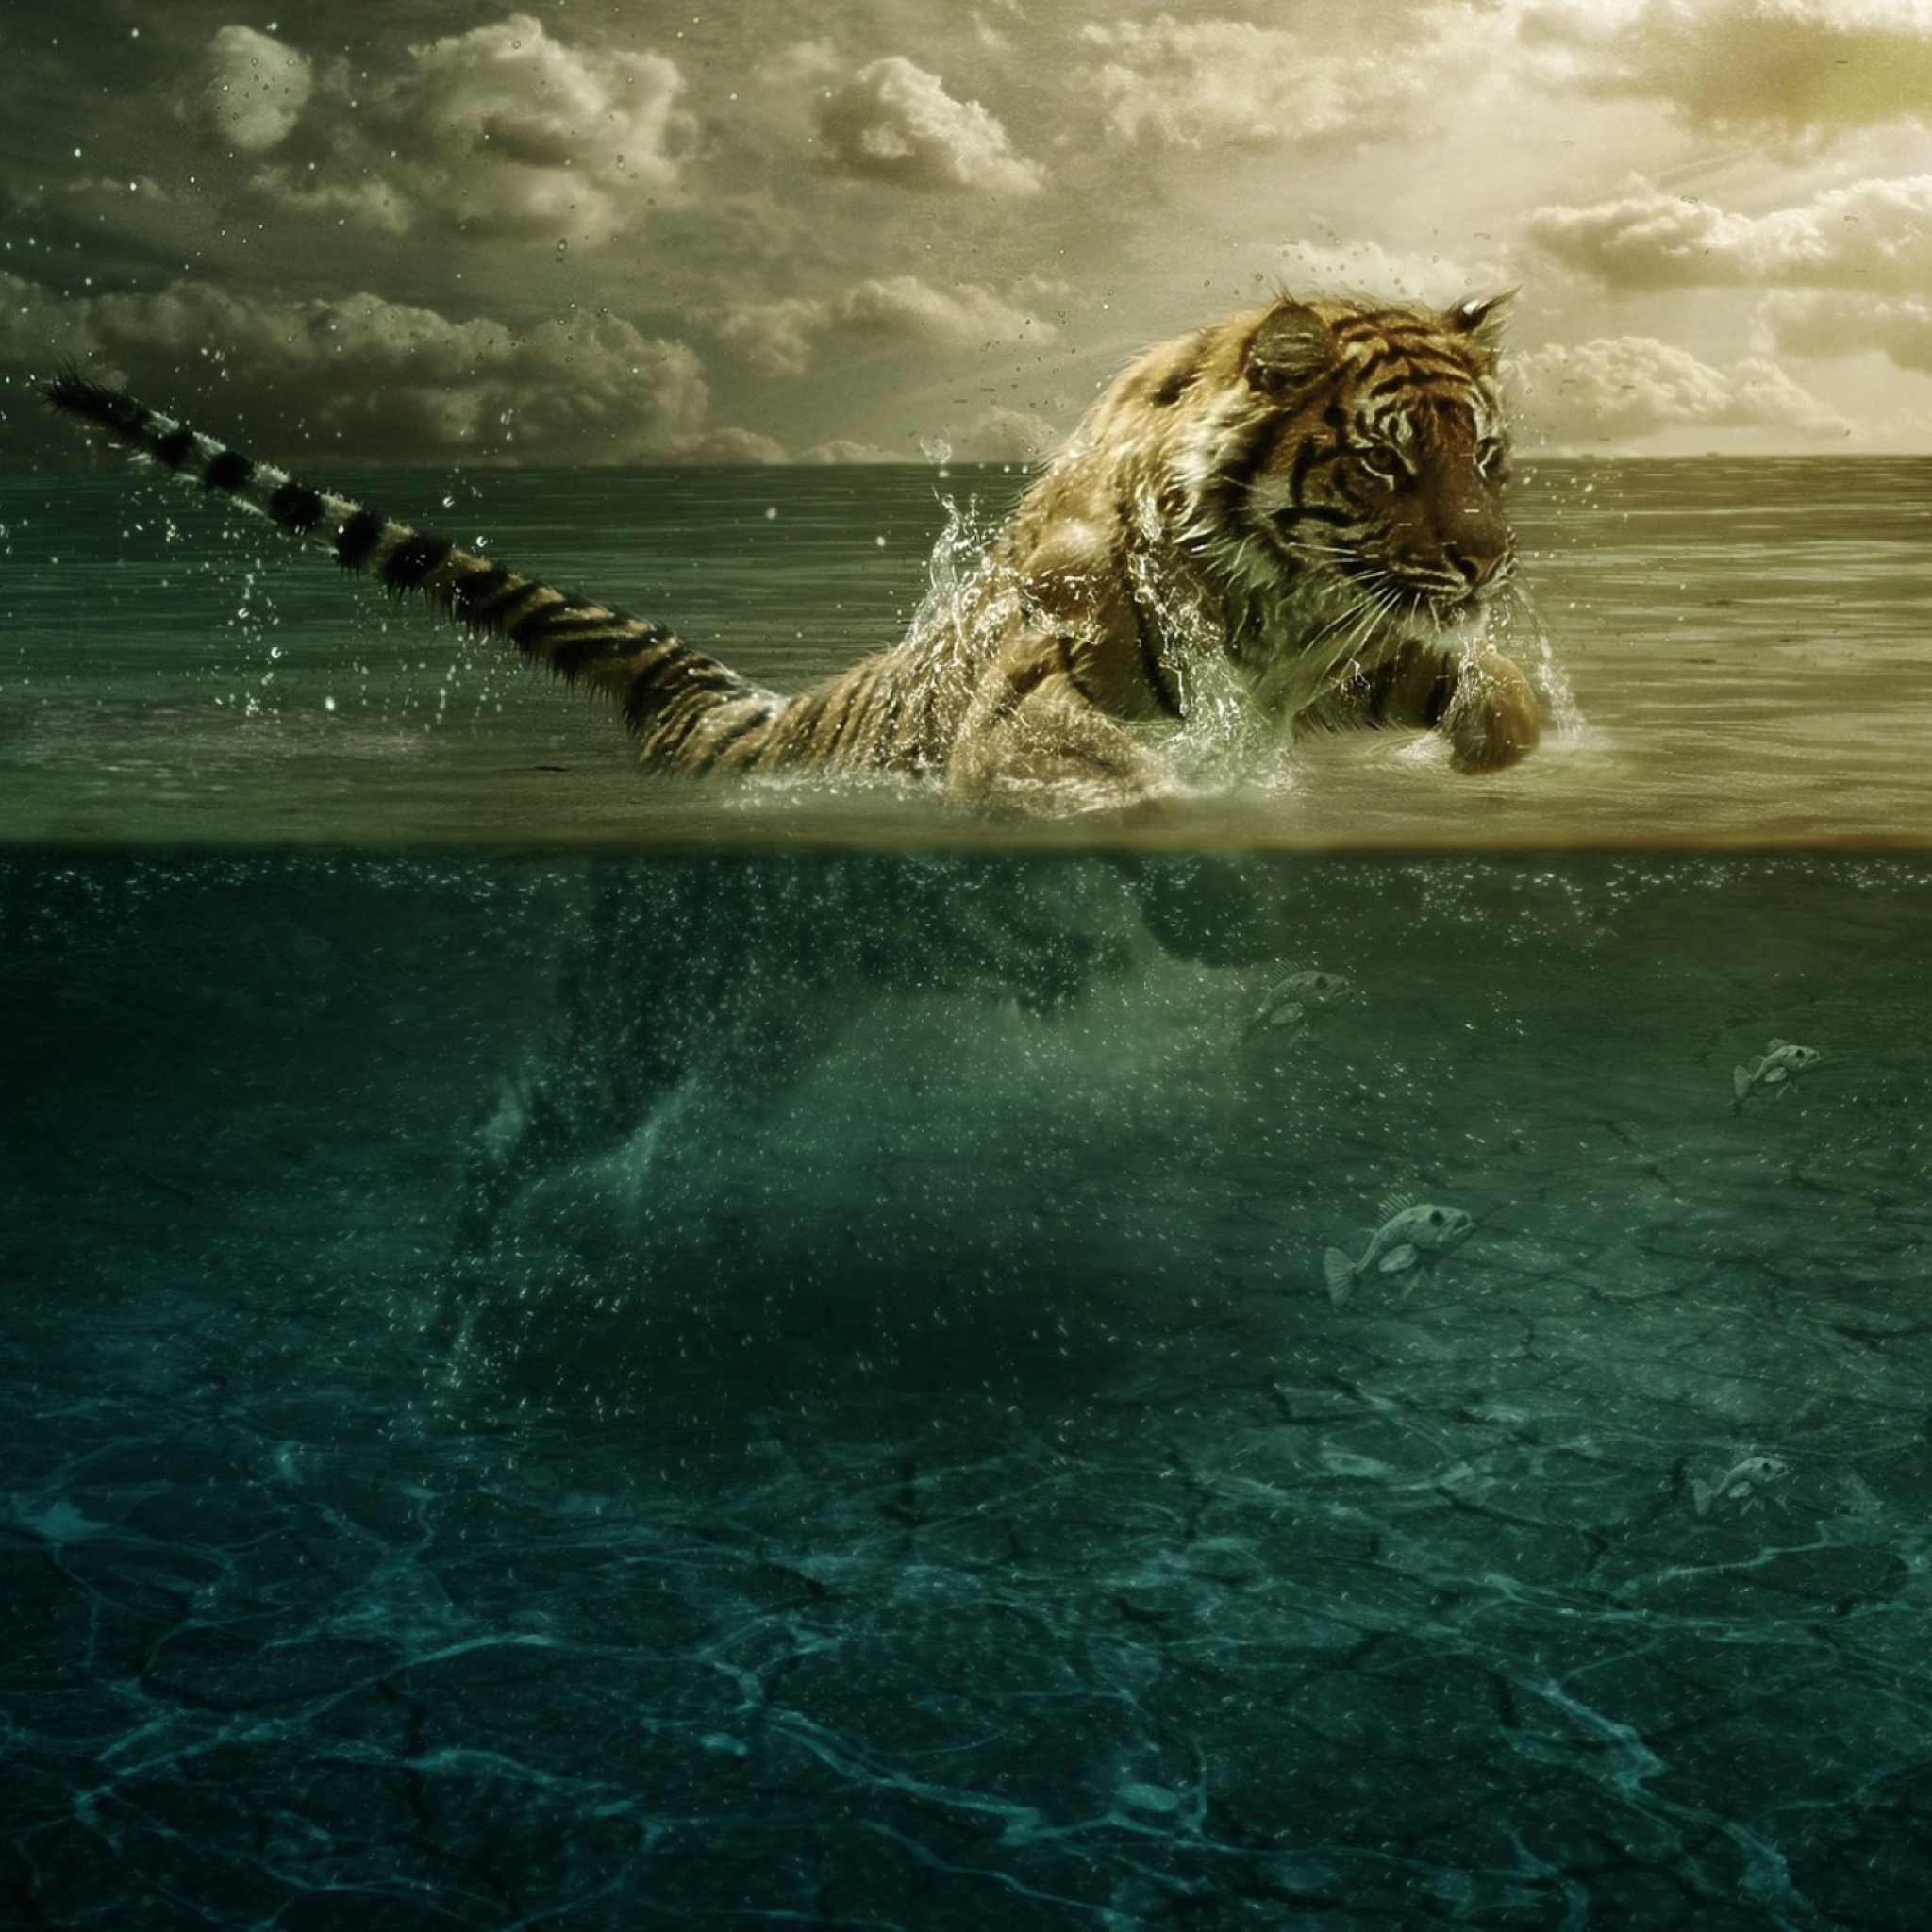 Tiger Jumping In Water wallpaper 2048x2048